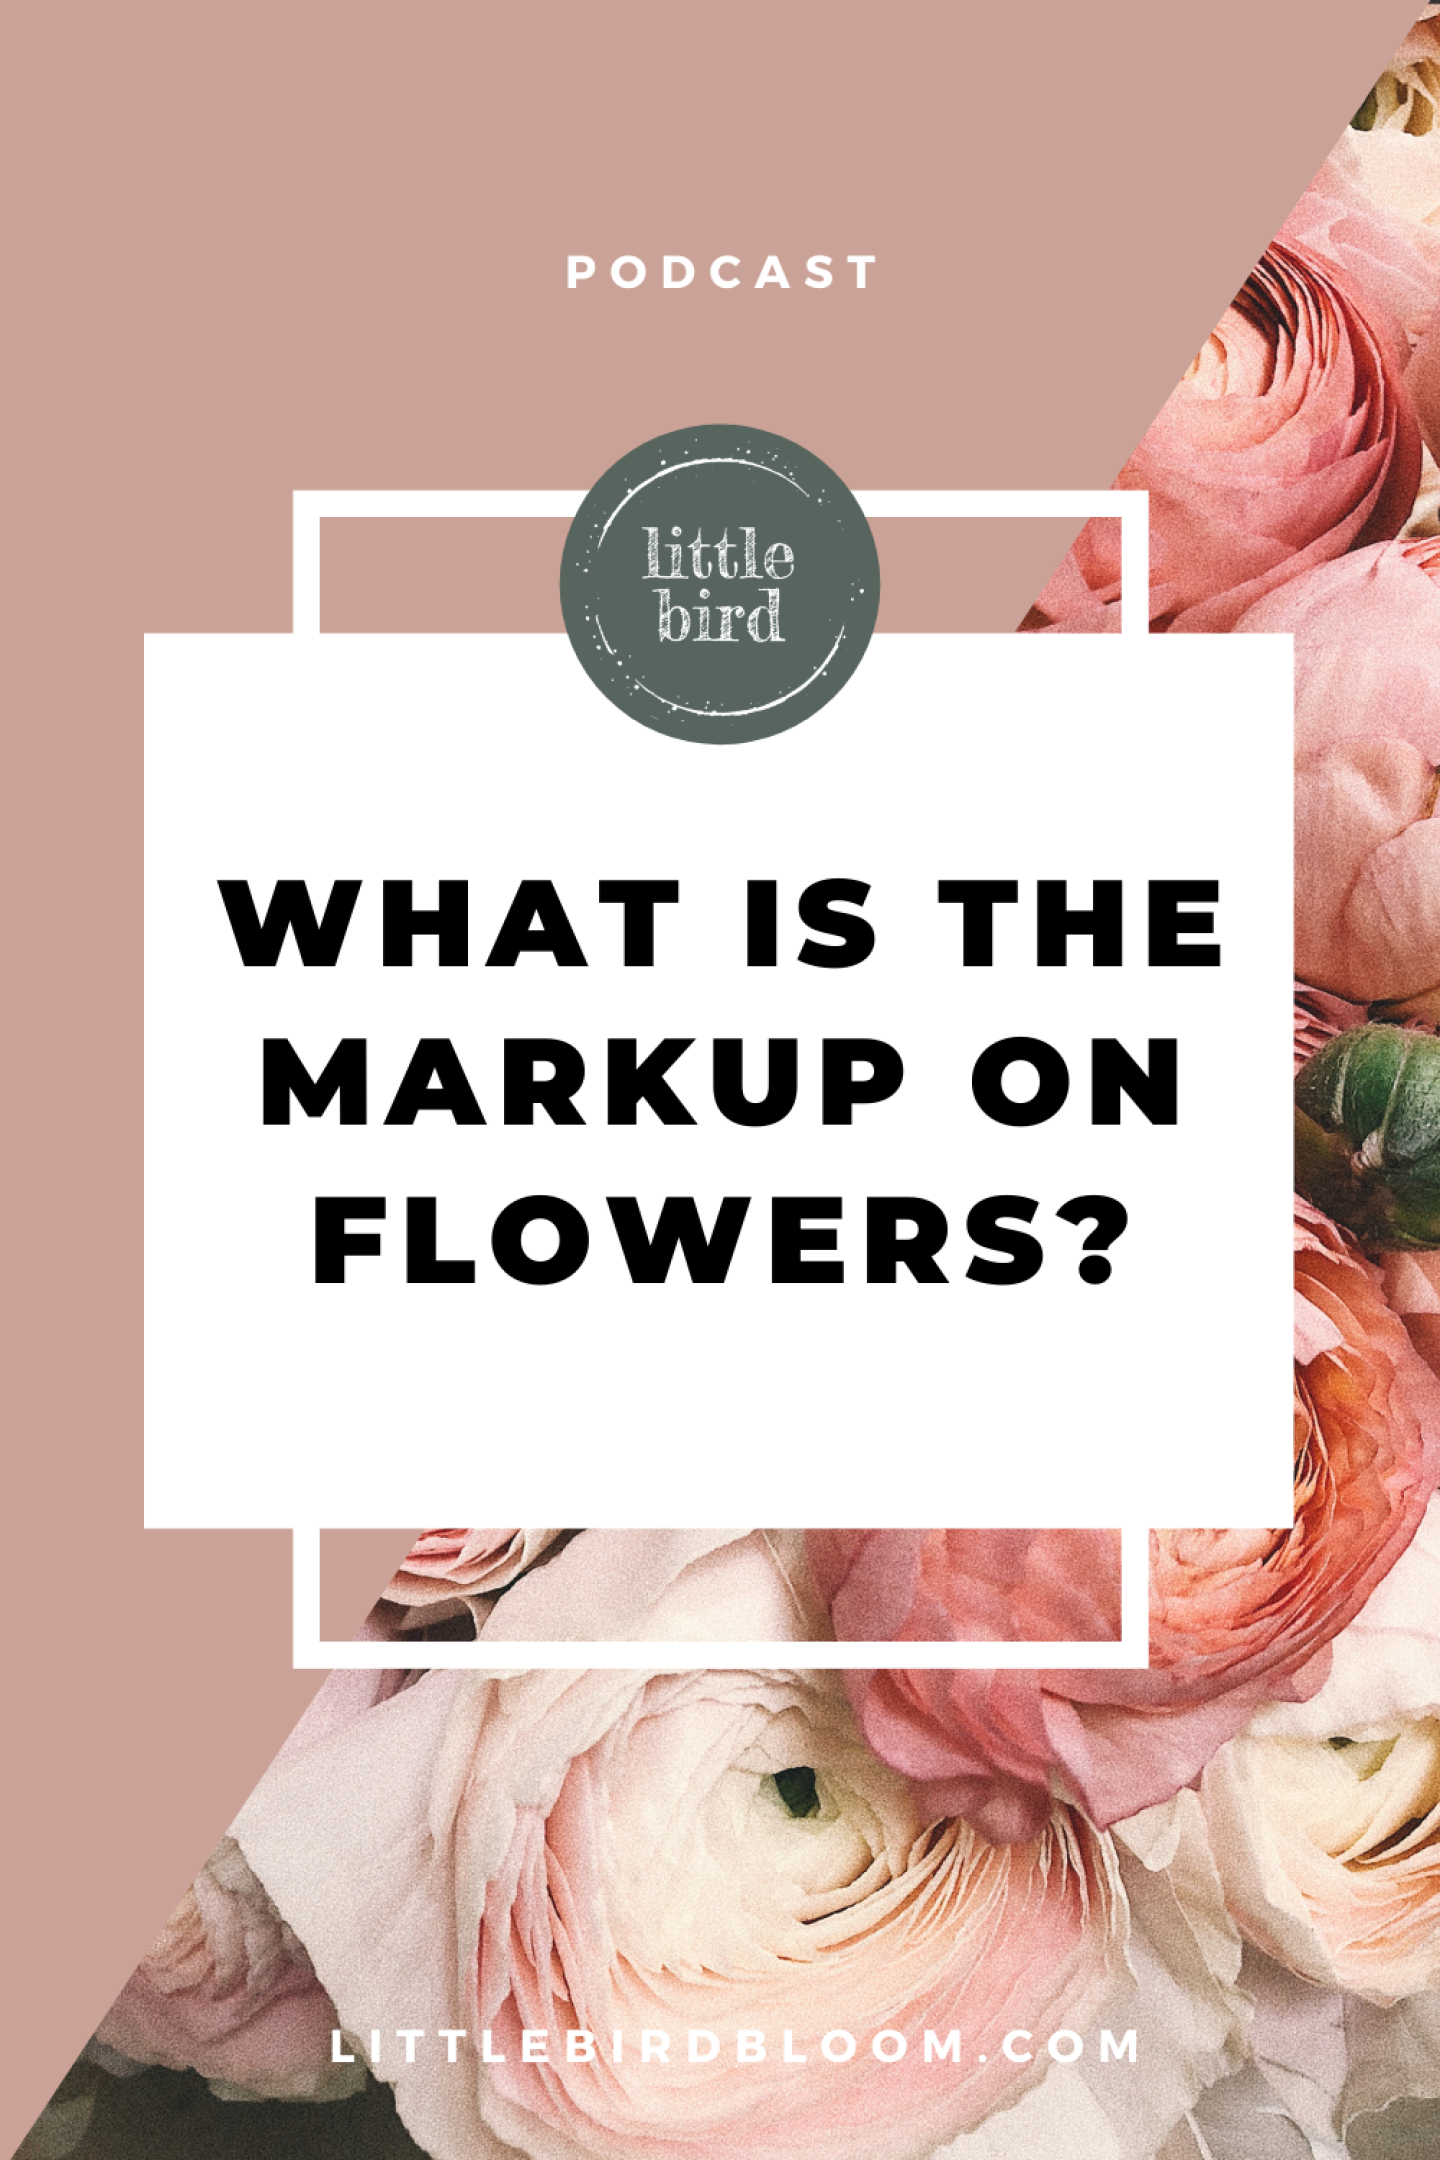 LBB Blog Images -What is the markup on flowers?